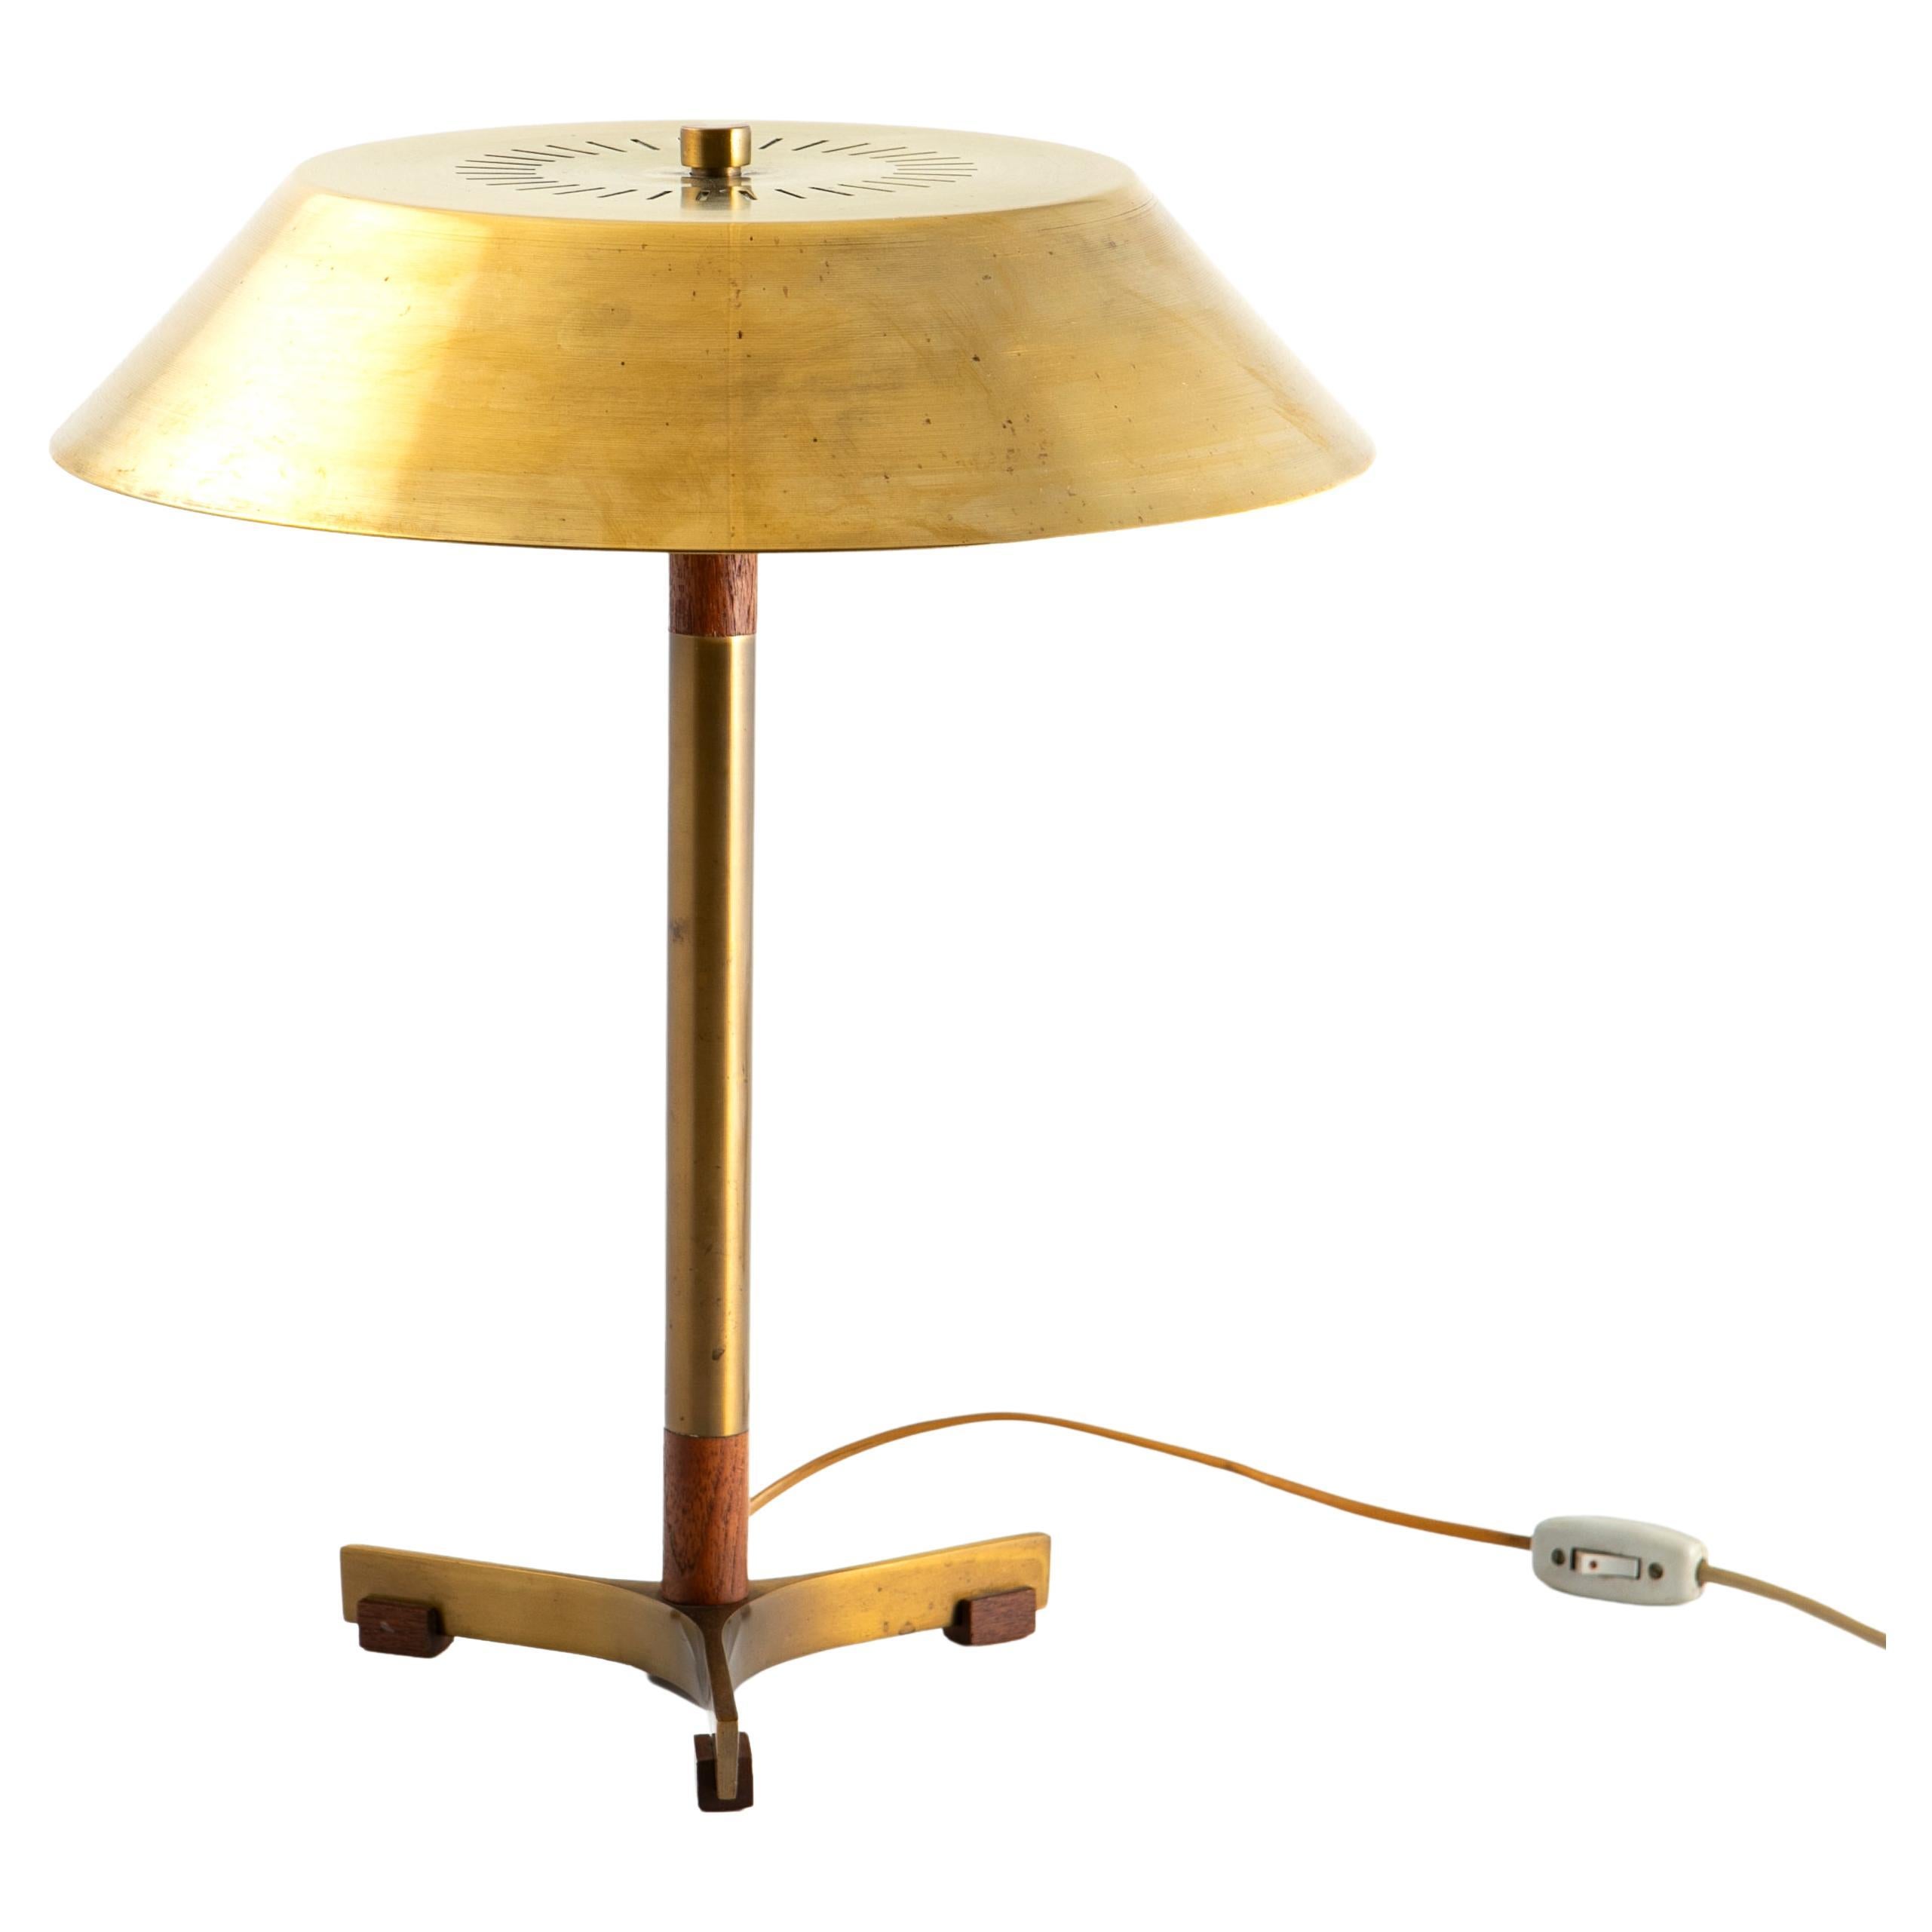 Table lamp model President designed by Jo Hammerborg. Produced by Fog & Mørup in Denmark, 1960's.
Teak and brass base, brass lampshade. This table lamp features two light sources.

Please note that the lamp is original of the period and this shows